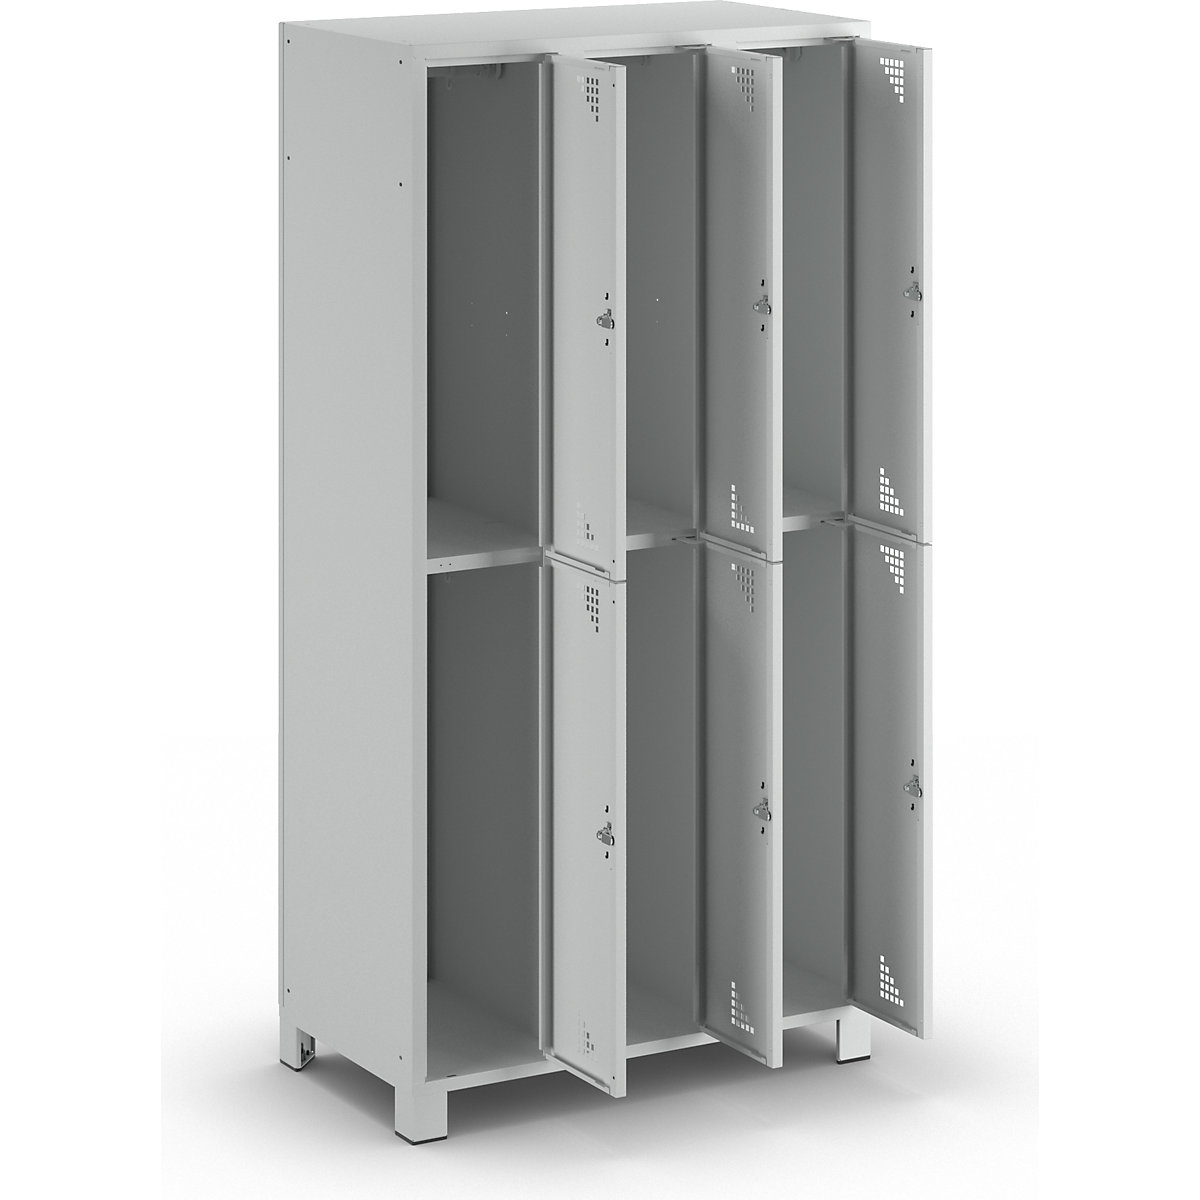 Cloakroom locker with half-height compartments - eurokraft pro